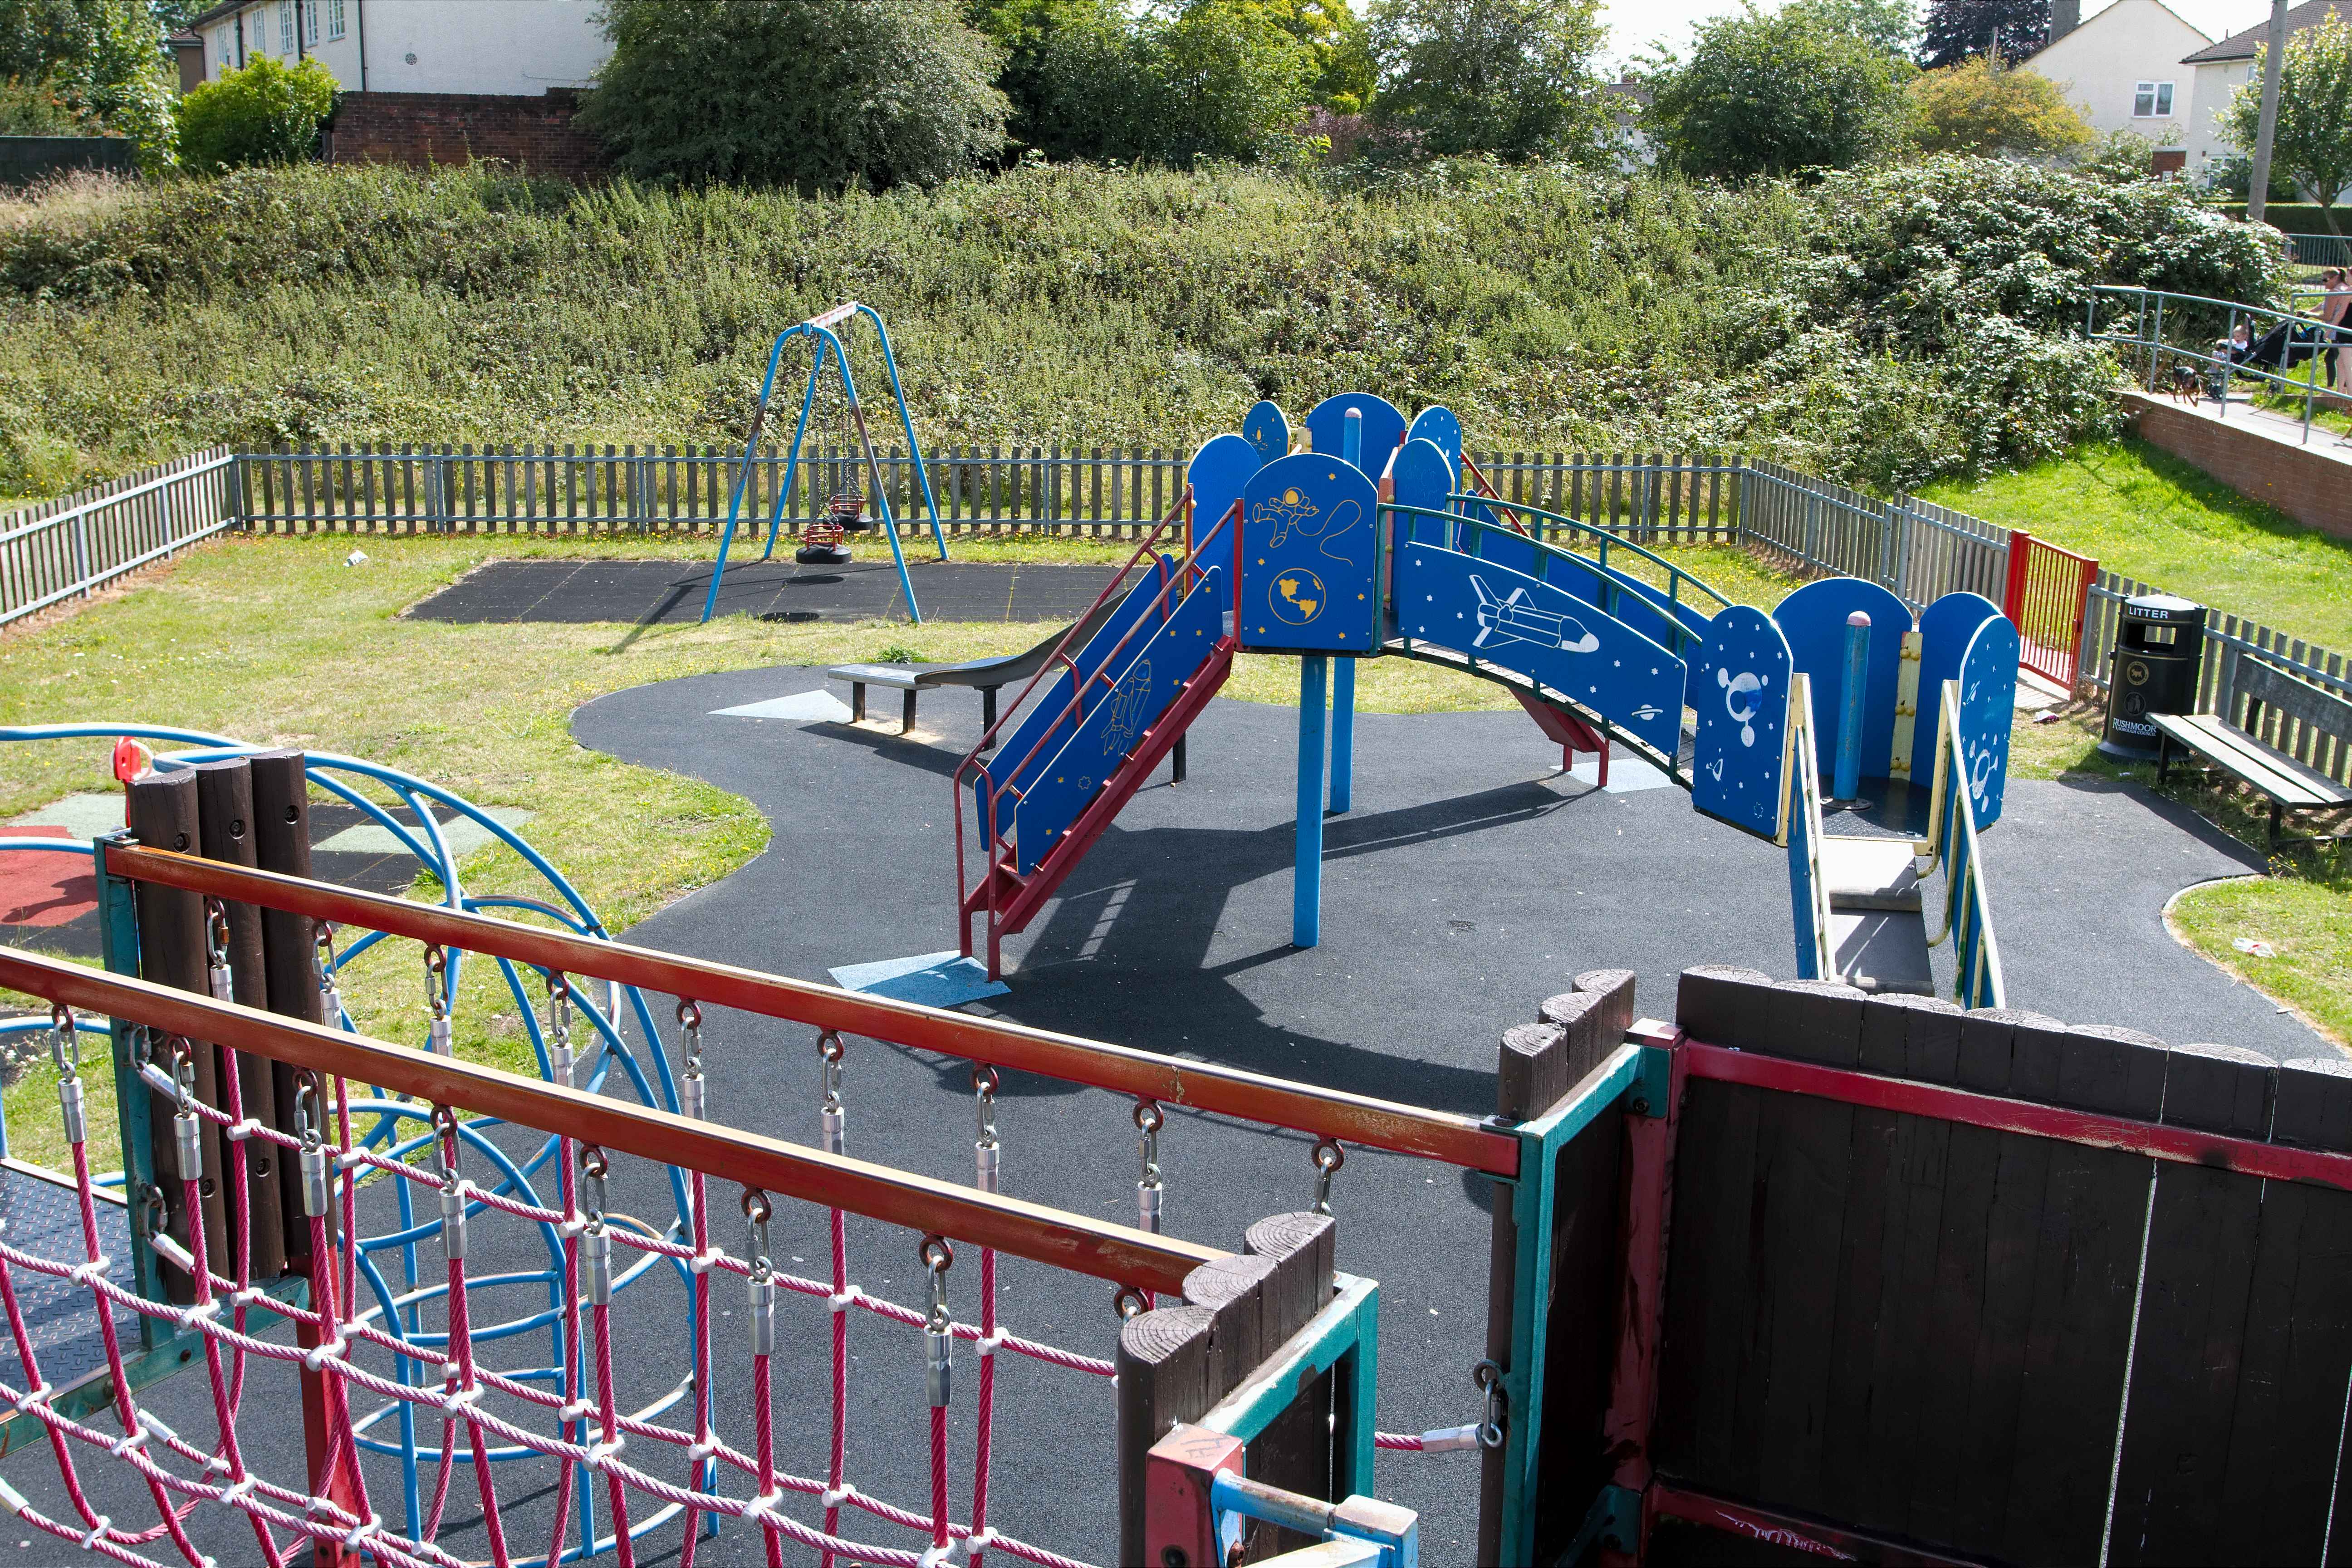 Prince Charles Crescent play equipment